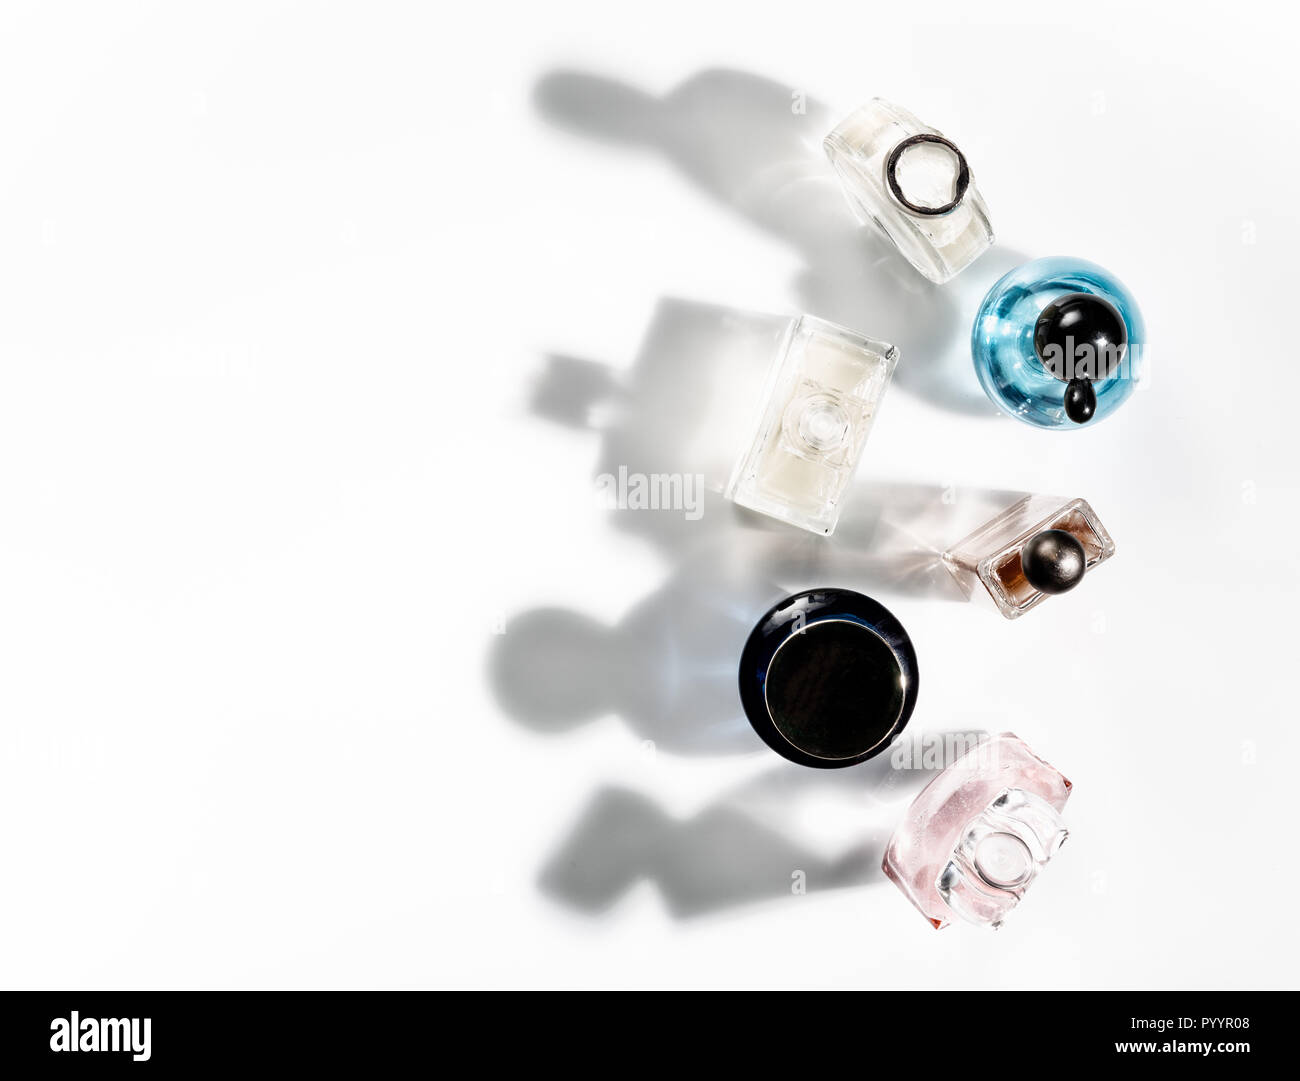 Shadows of perfume bottles falling on a white background. View from above. Stock Photo